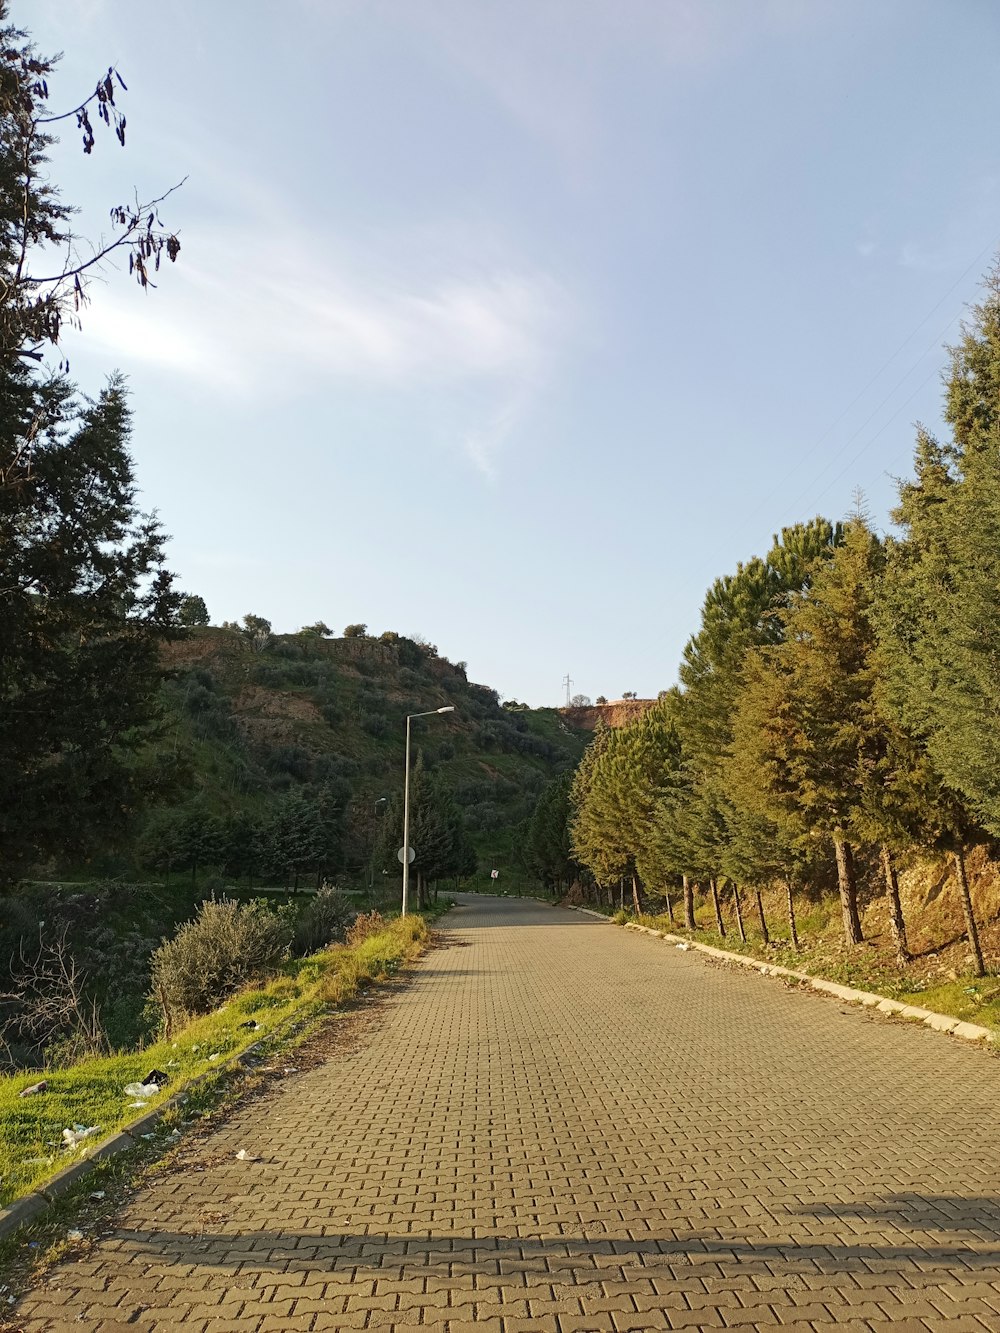 a paved road with trees on both sides